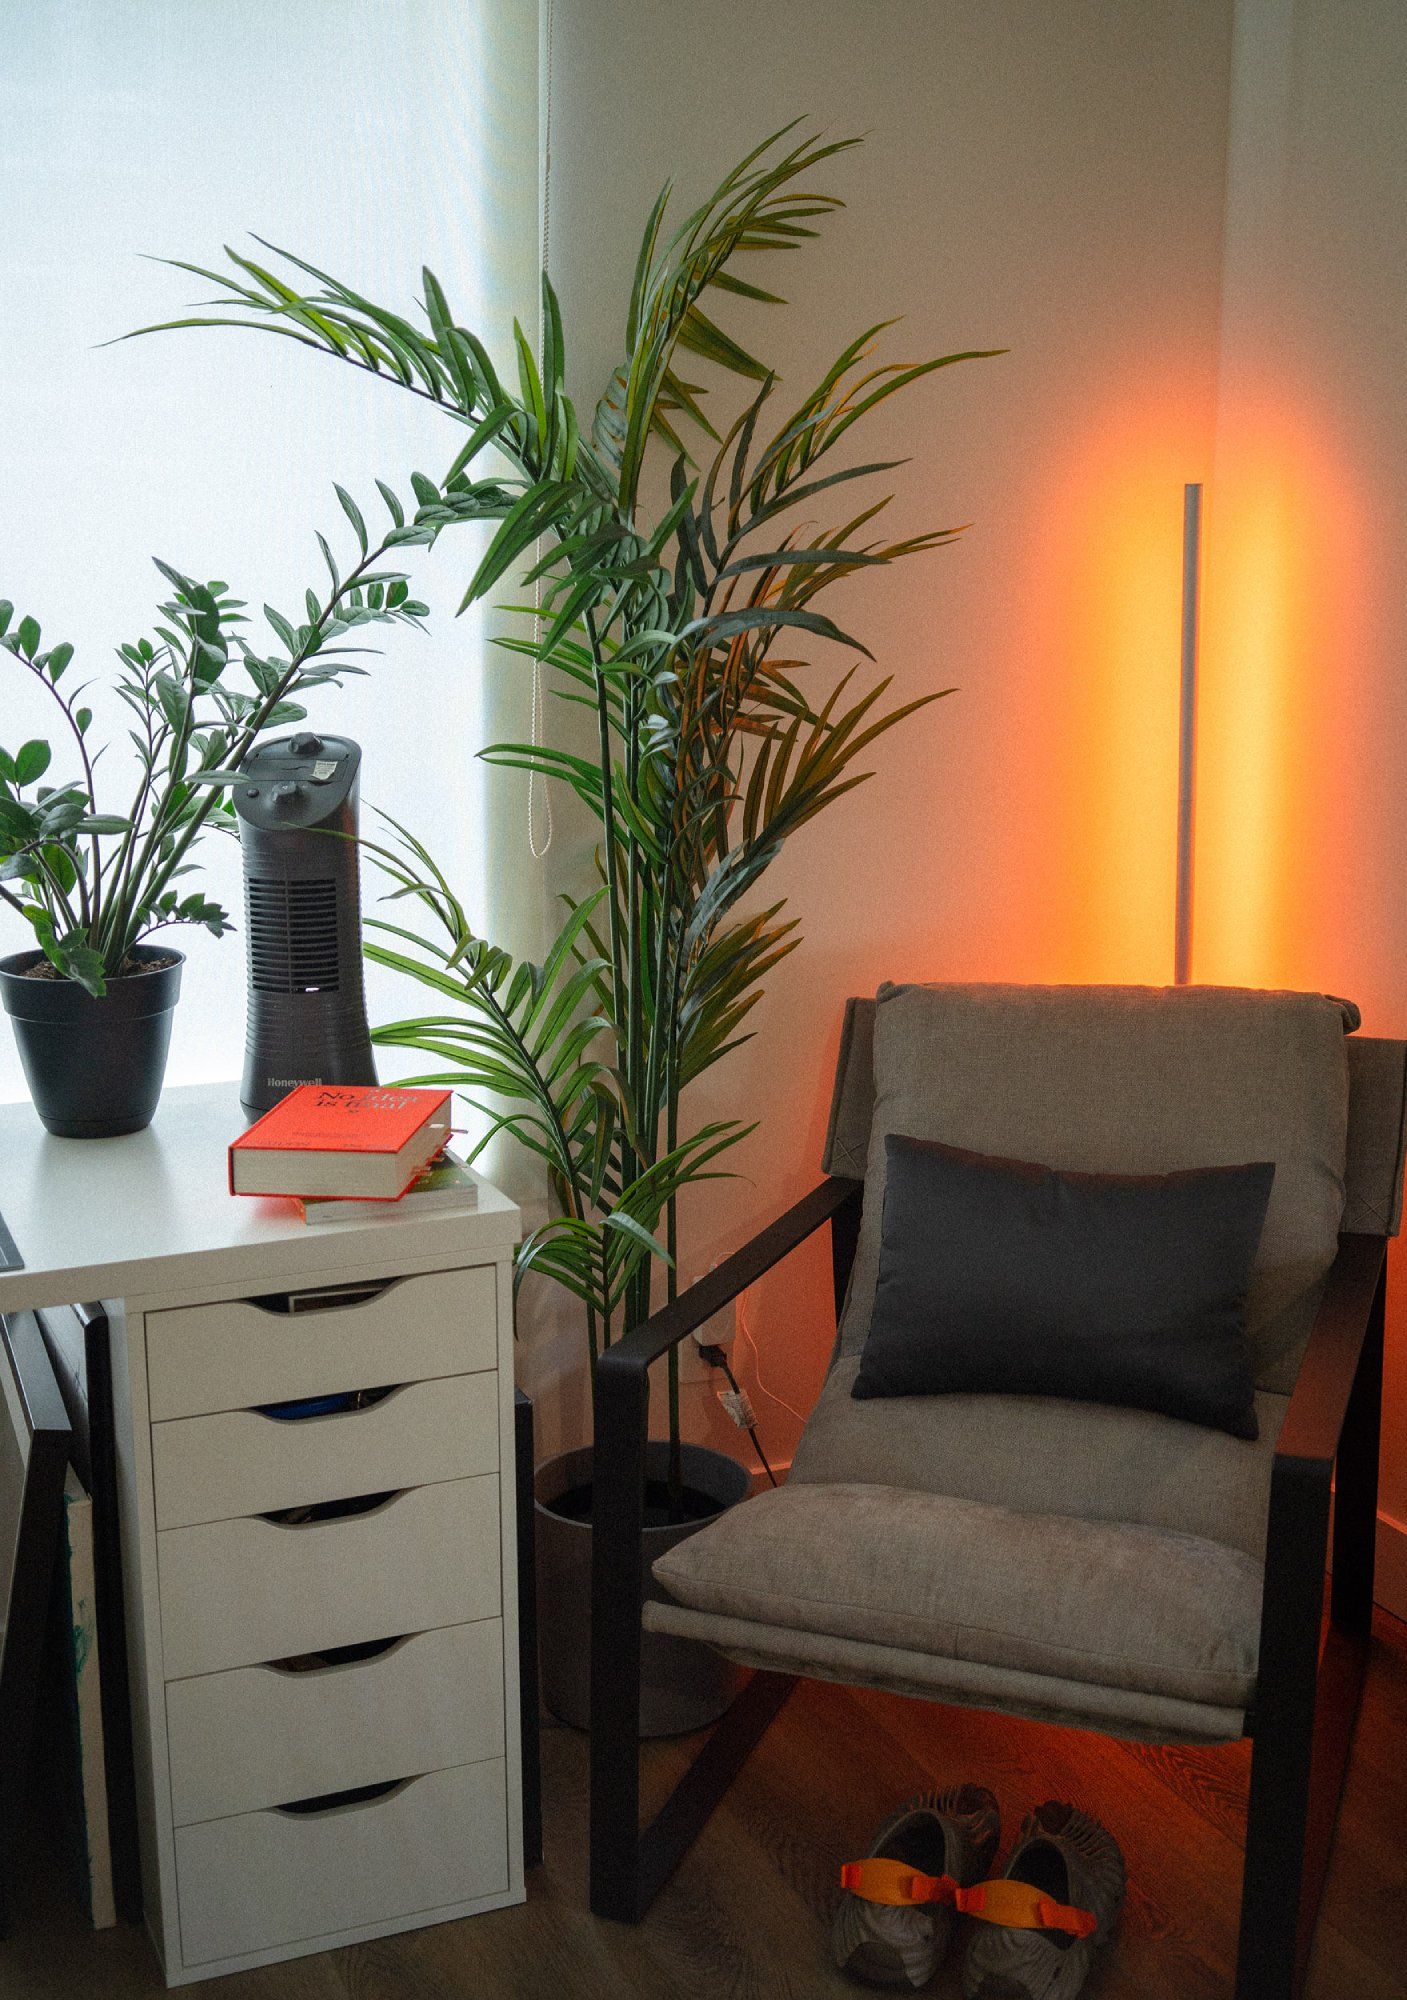 A corner of the home office with an armchair, an ALEX drawer, and two indoor plants